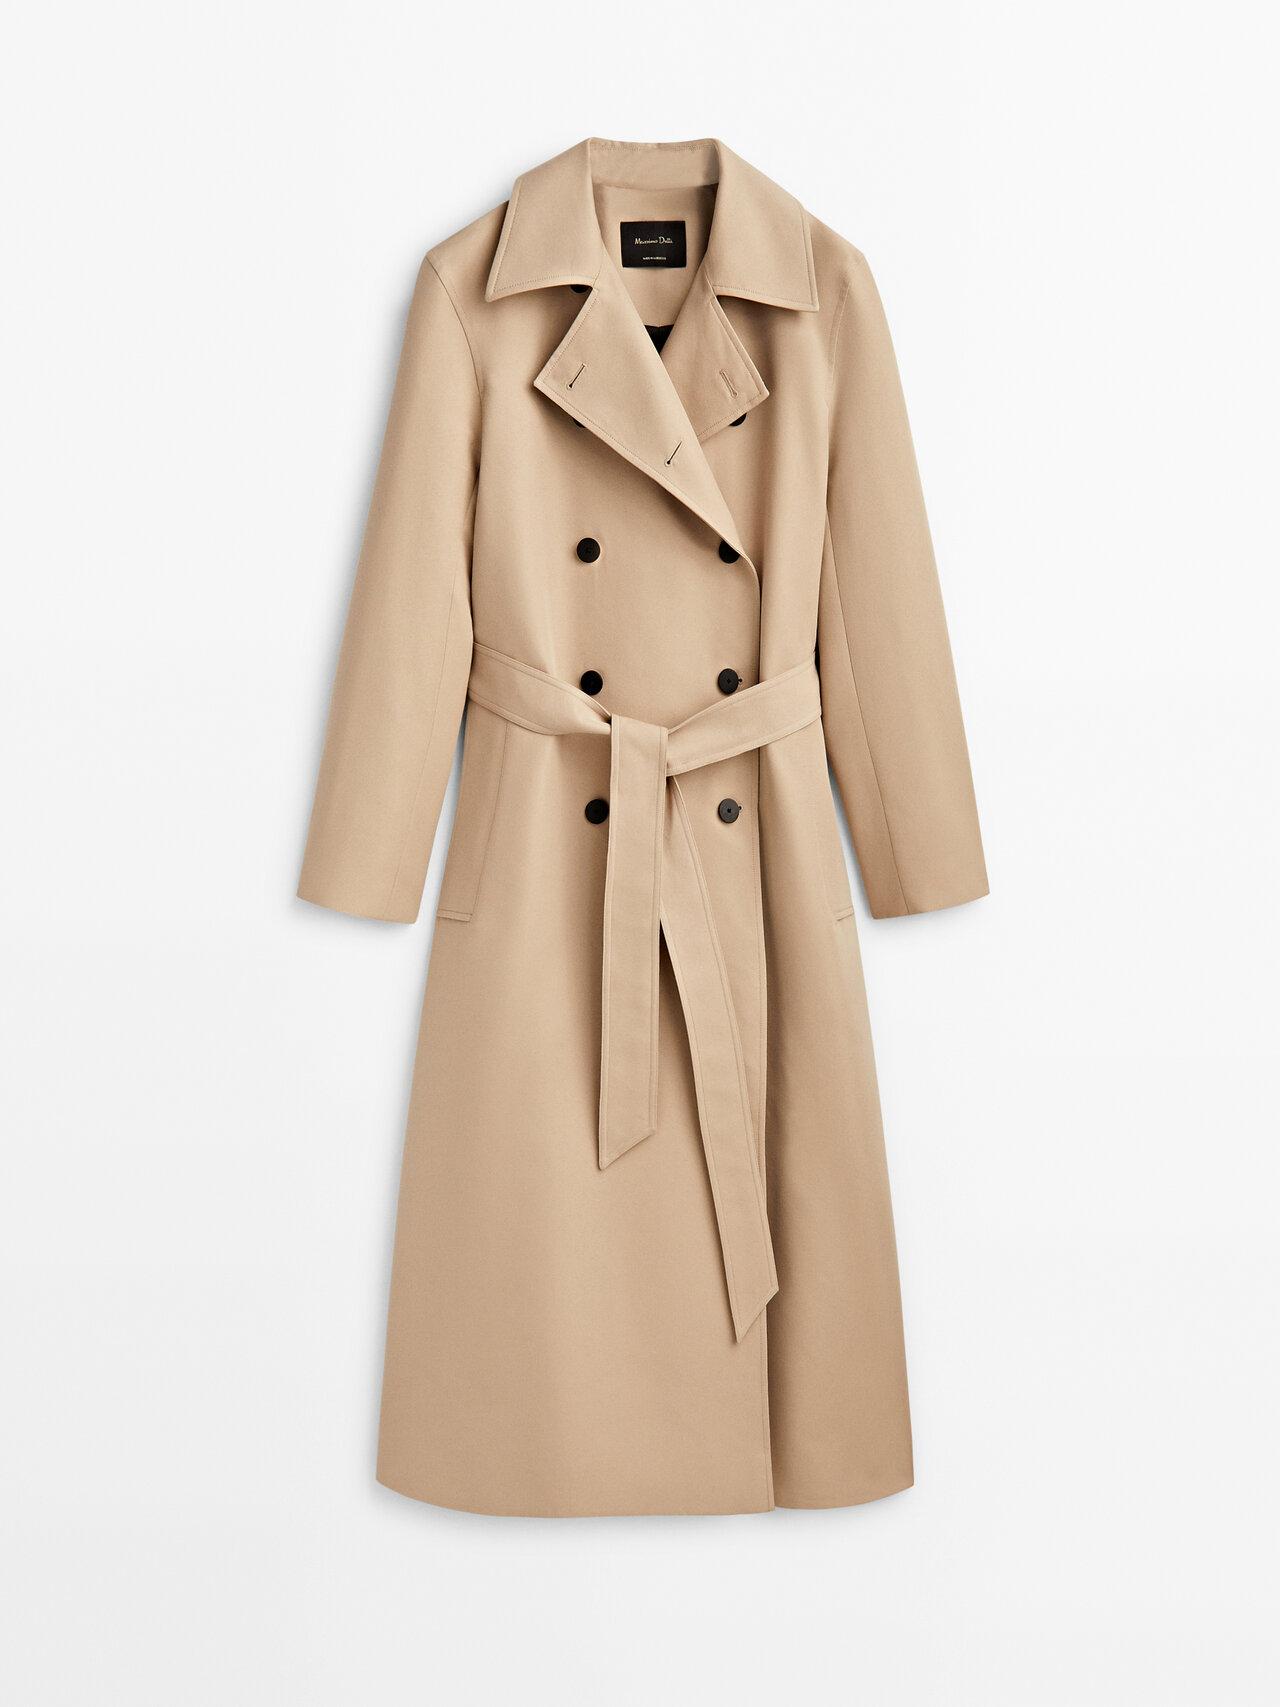 MASSIMO DUTTI Trench Coat With Belt in Natural | Lyst